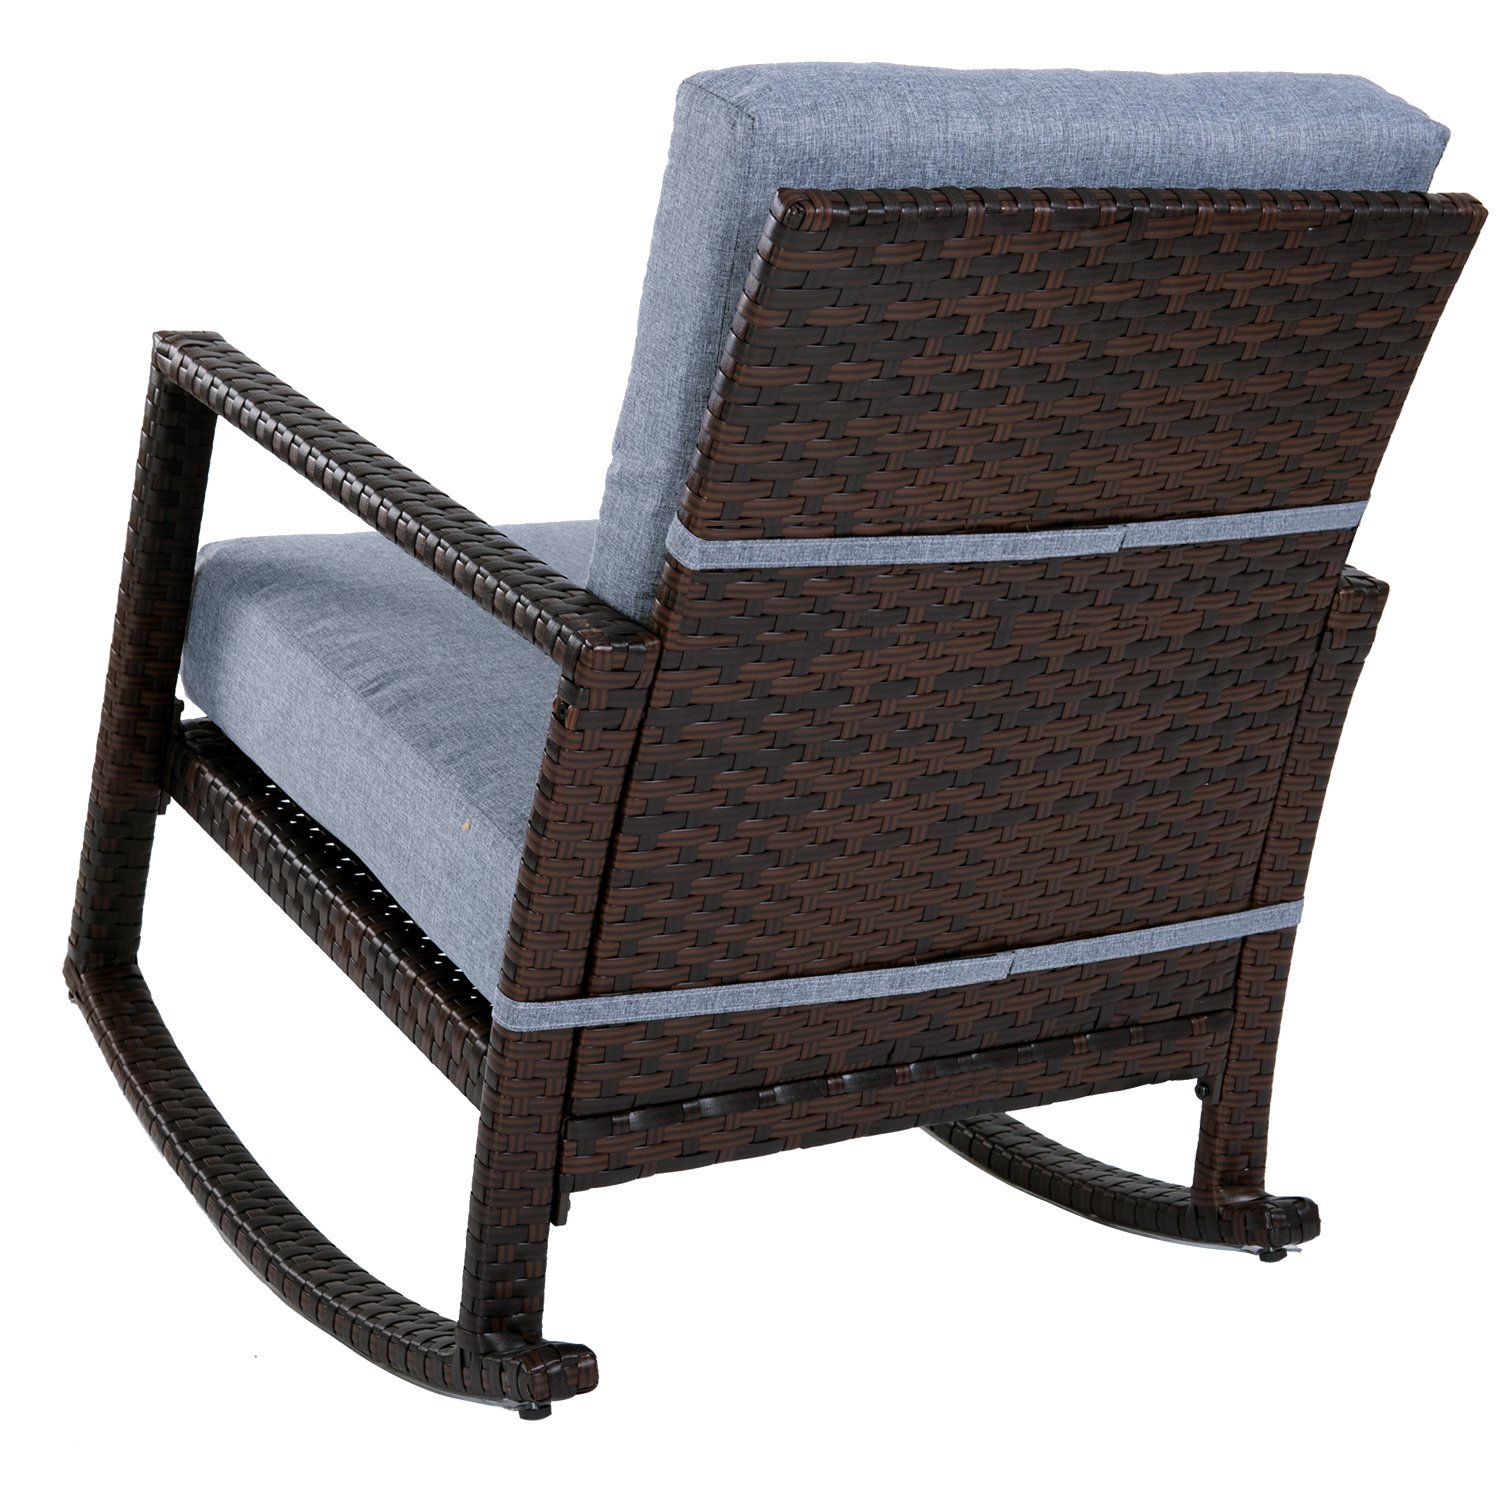 Merax Cushioned Rattan Rocker Chair Rocking Armchair Chair Outdoor Patio Glider Lounge Wicker Chair Furniture with Cushion - image 3 of 5